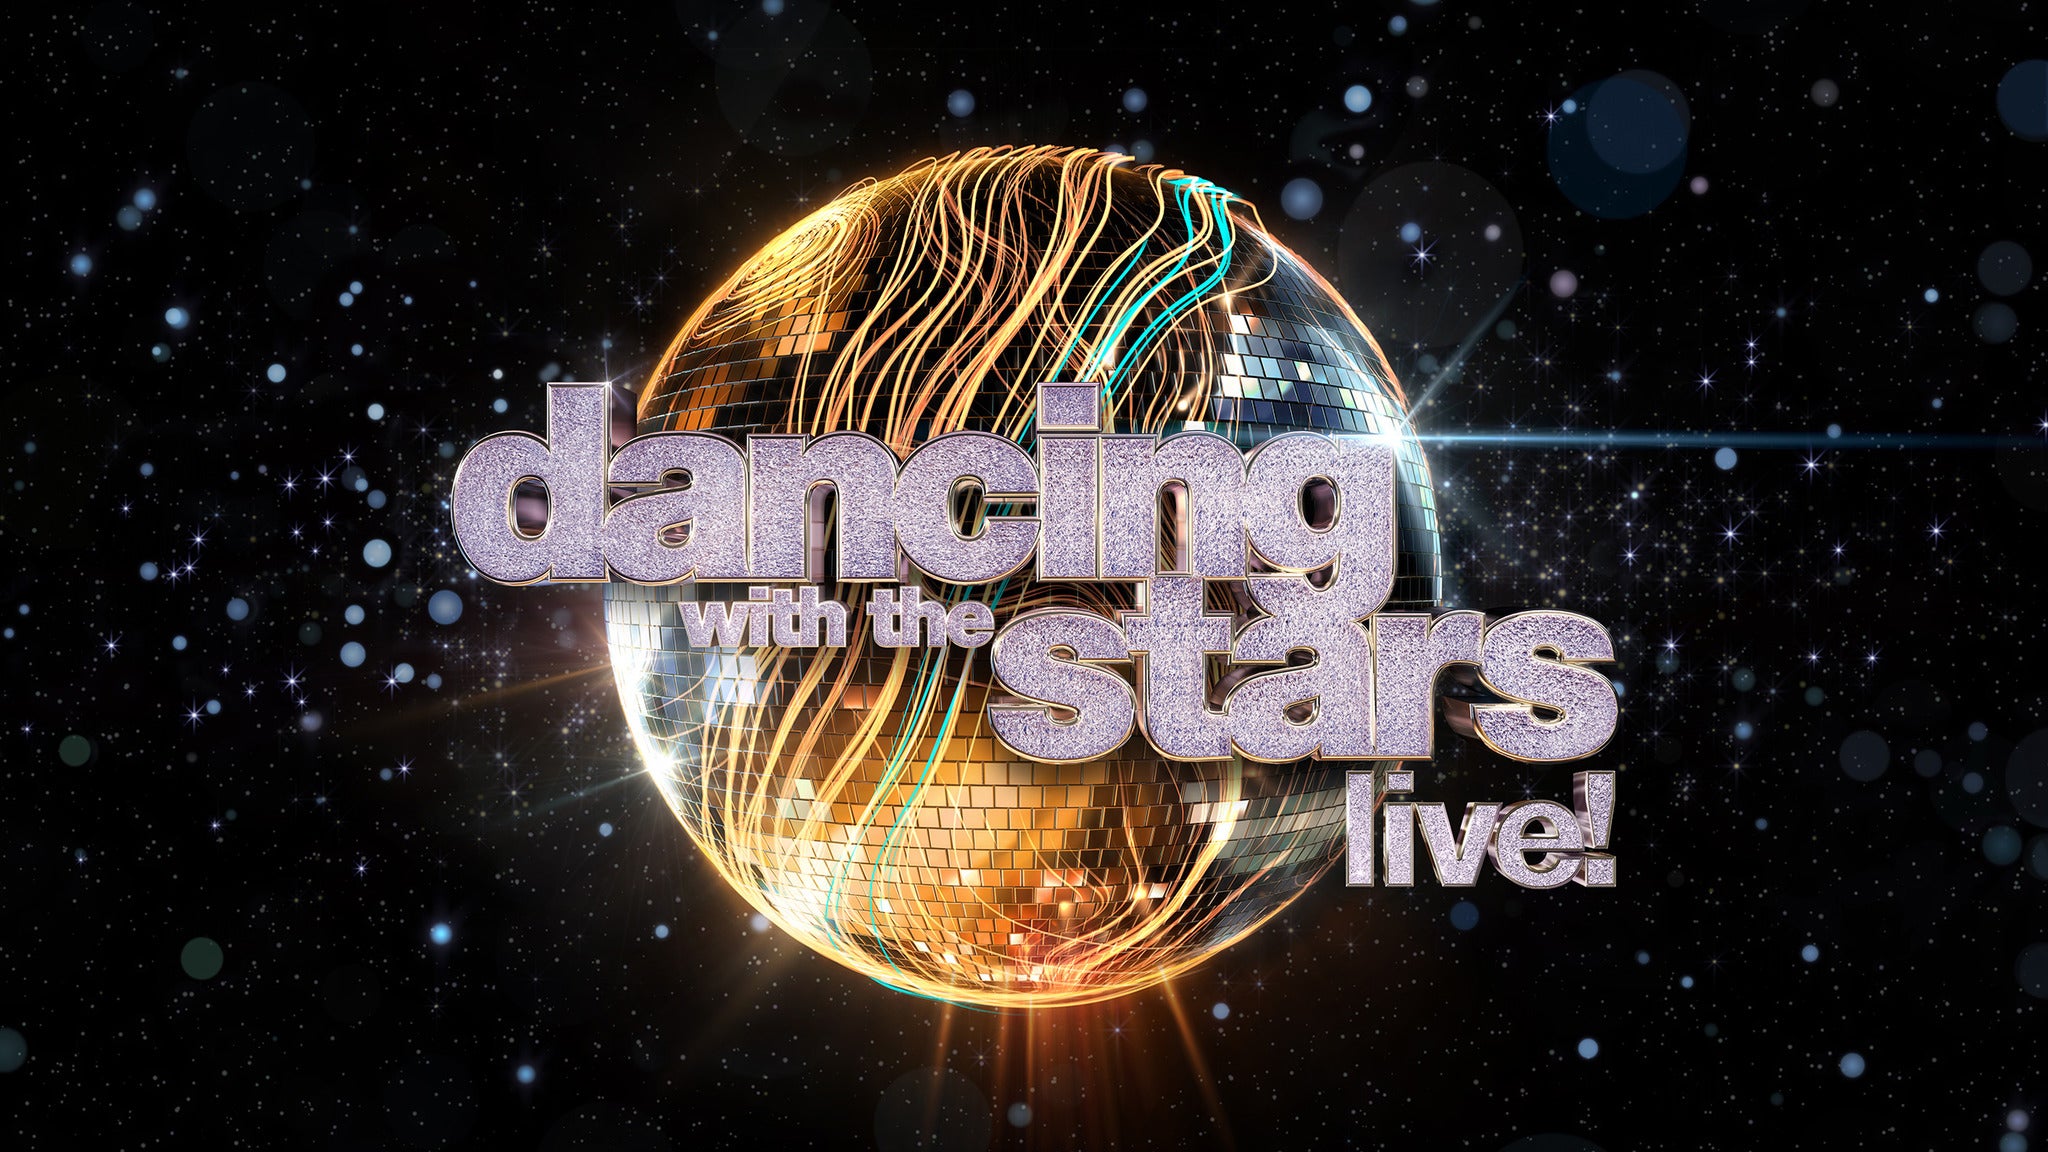 Dancing With The Stars: Live! - Light Up The Night in Riverside promo photo for Live Nation Mobile App presale offer code